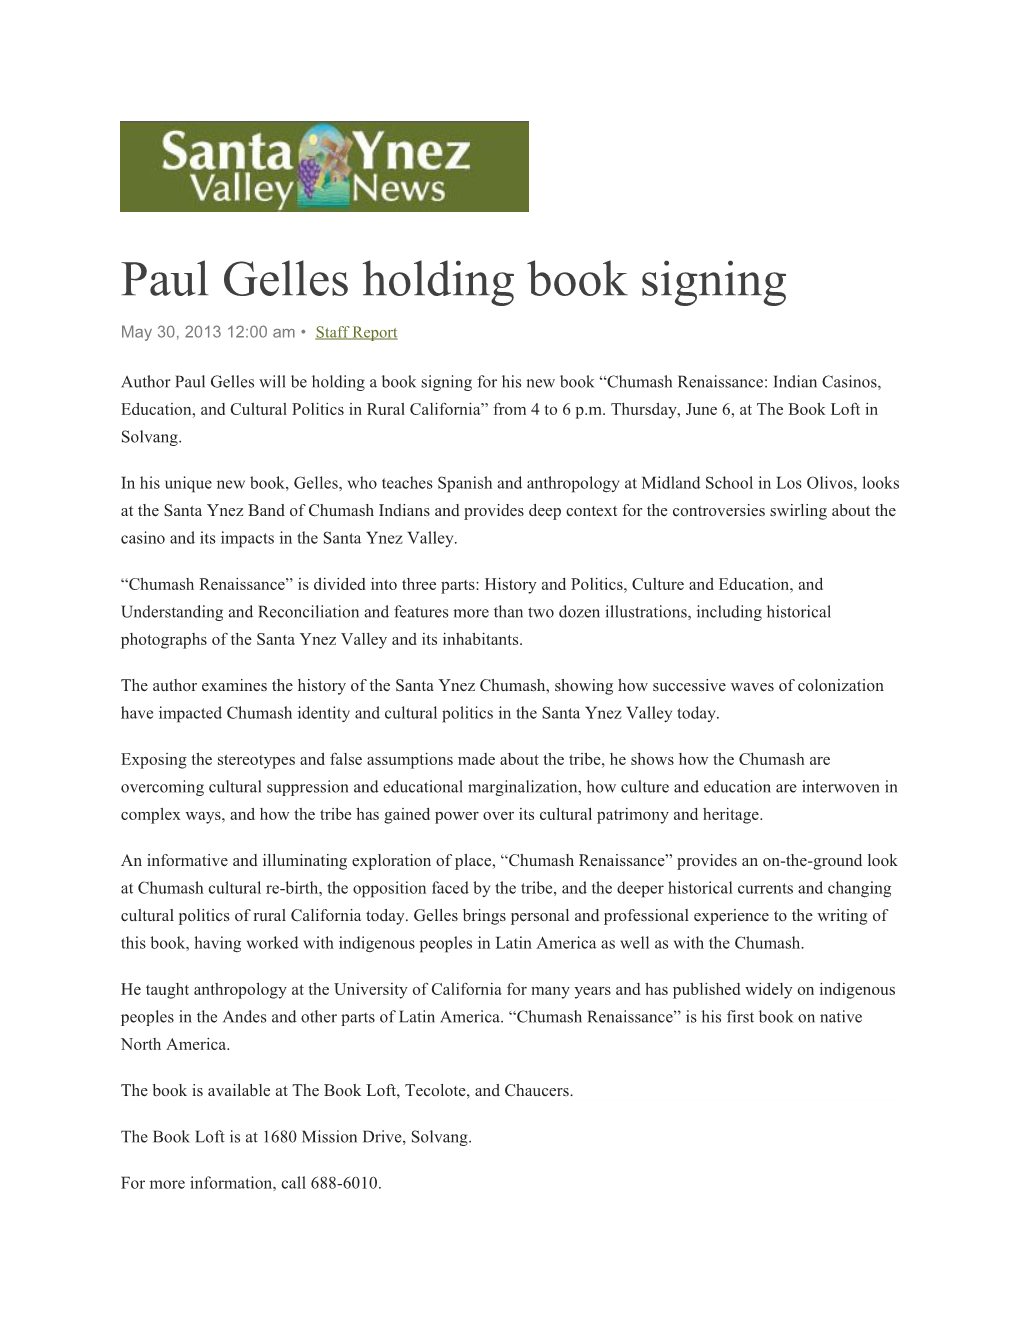 Paul Gelles Holding Book Signing